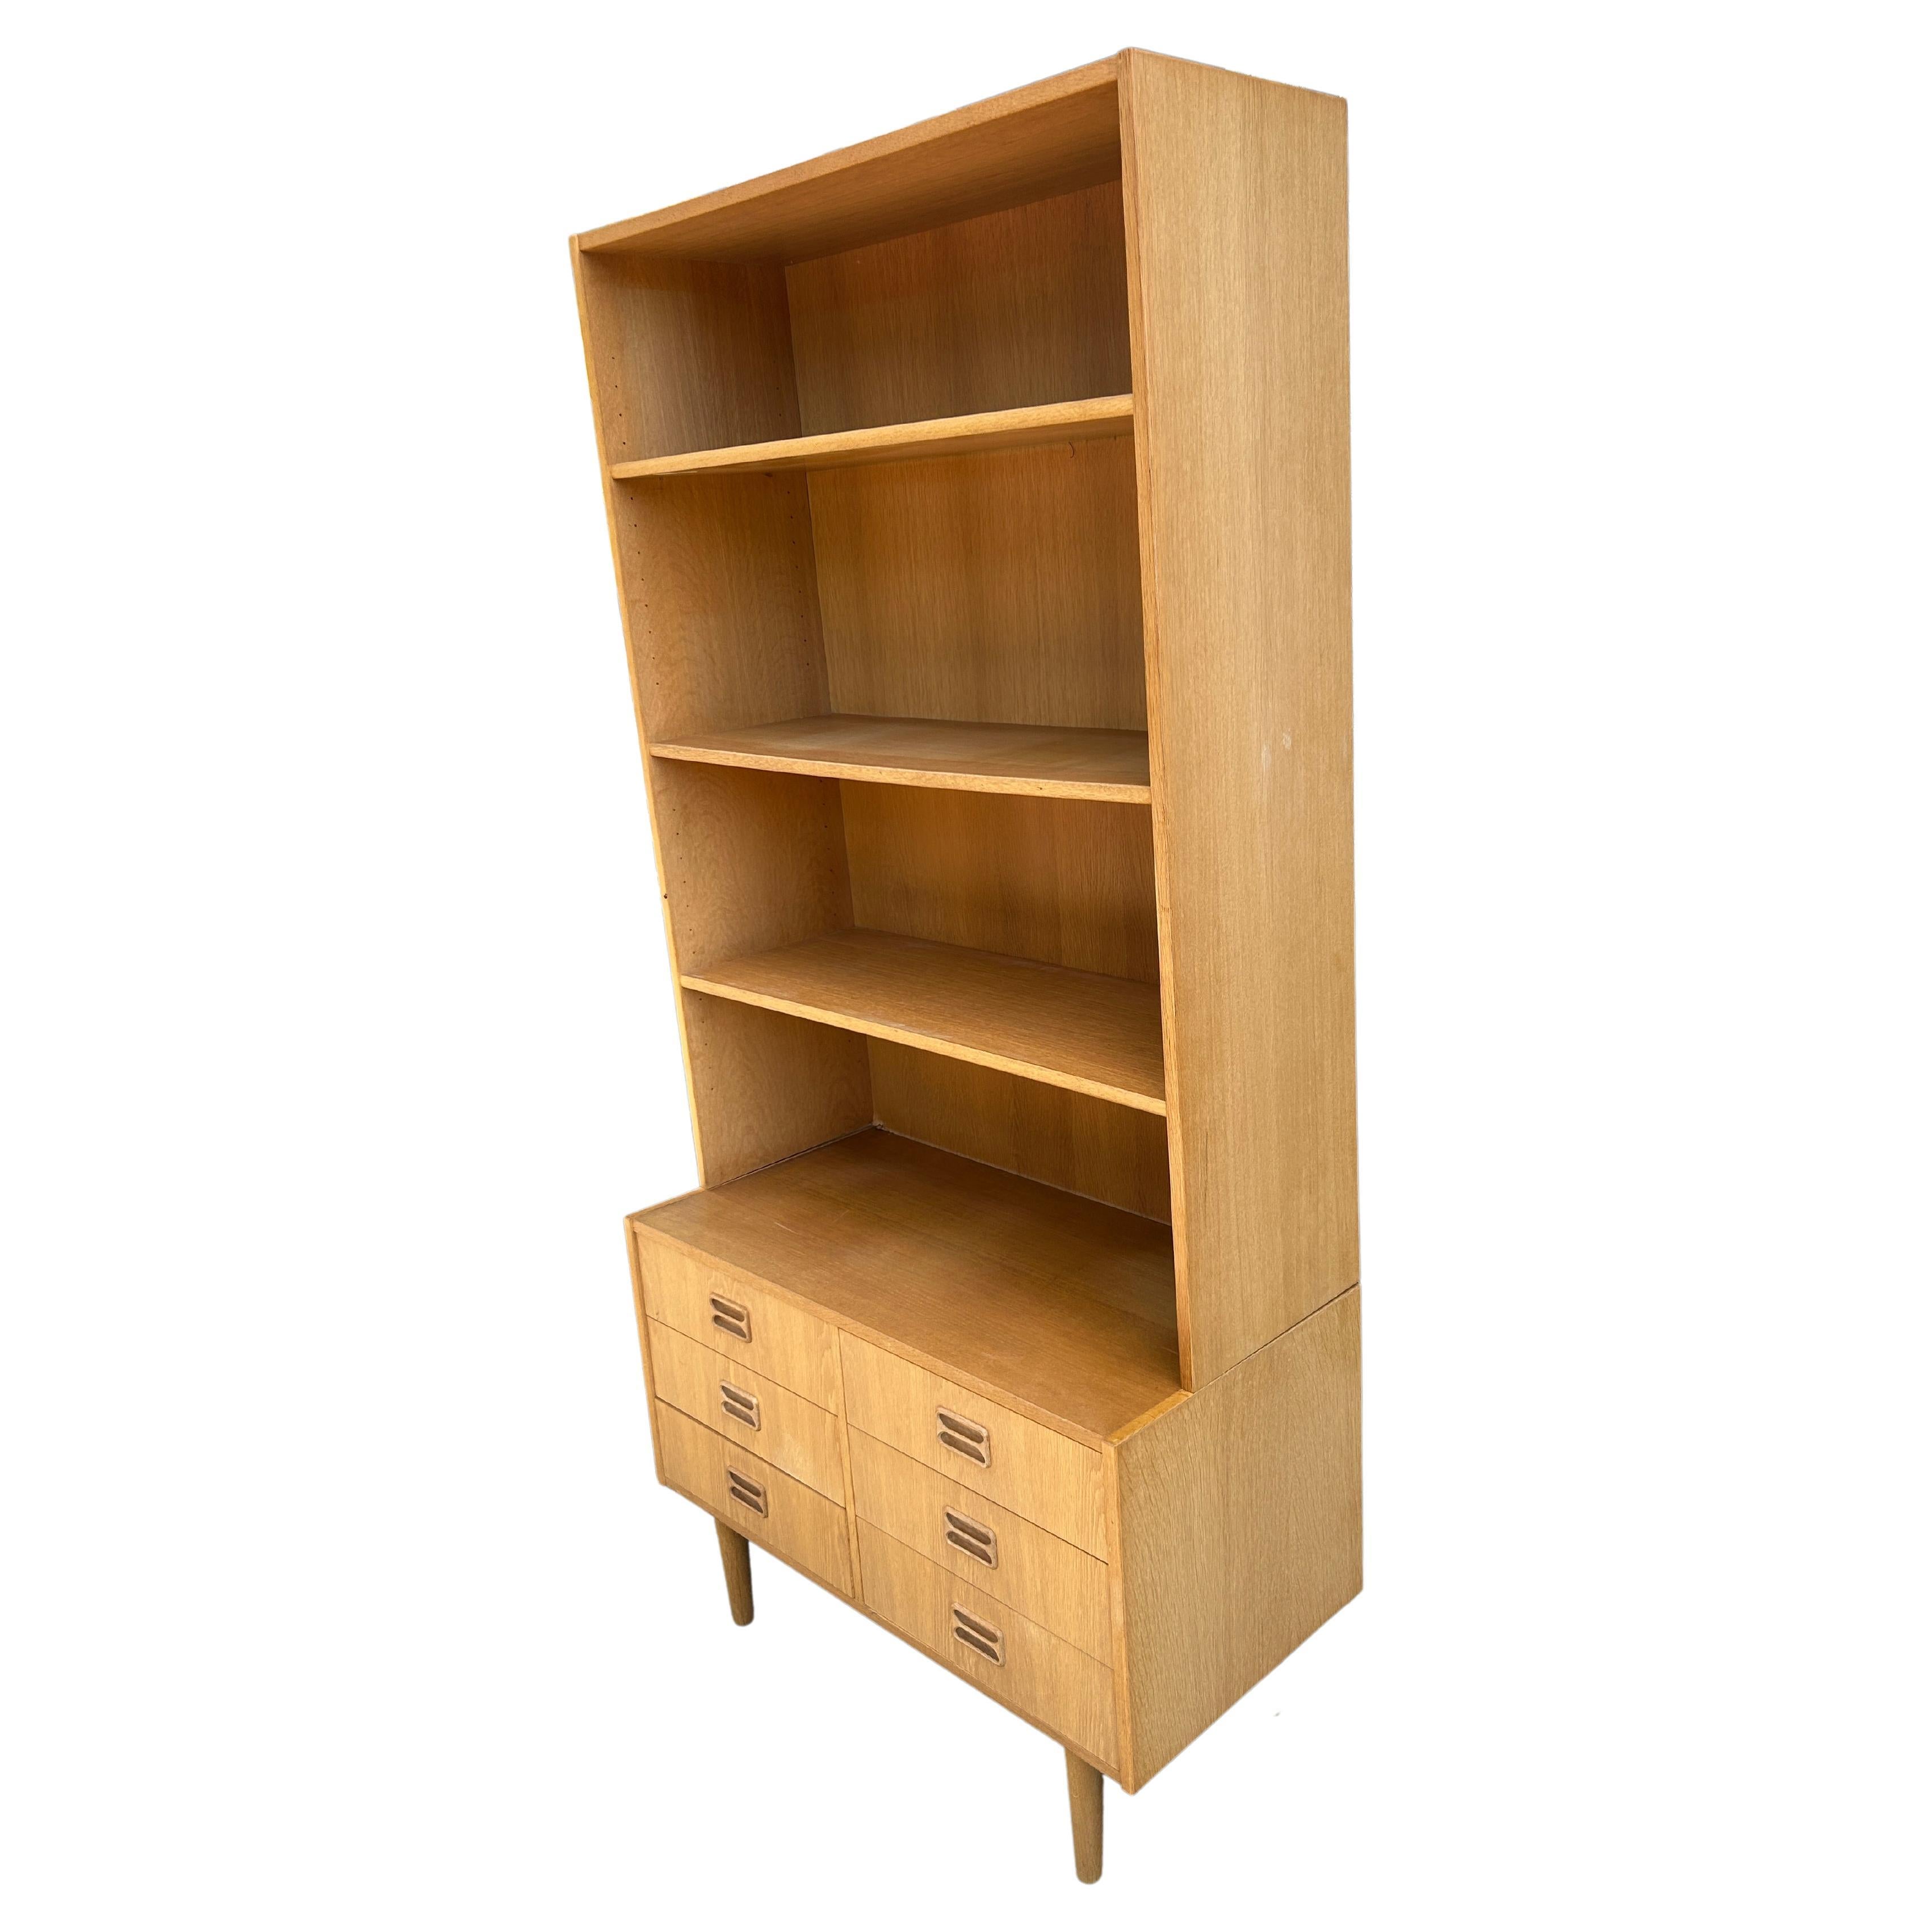 Midcentury danish modern tall light white oak bookcase with lower 6 drawer dresser. Great tall narrow Wall unit bookcase with Lower dresser. Lower small 6 drawer dresser on tapered oak legs with carved Handles. The top has 3 Shelves with 2 of them